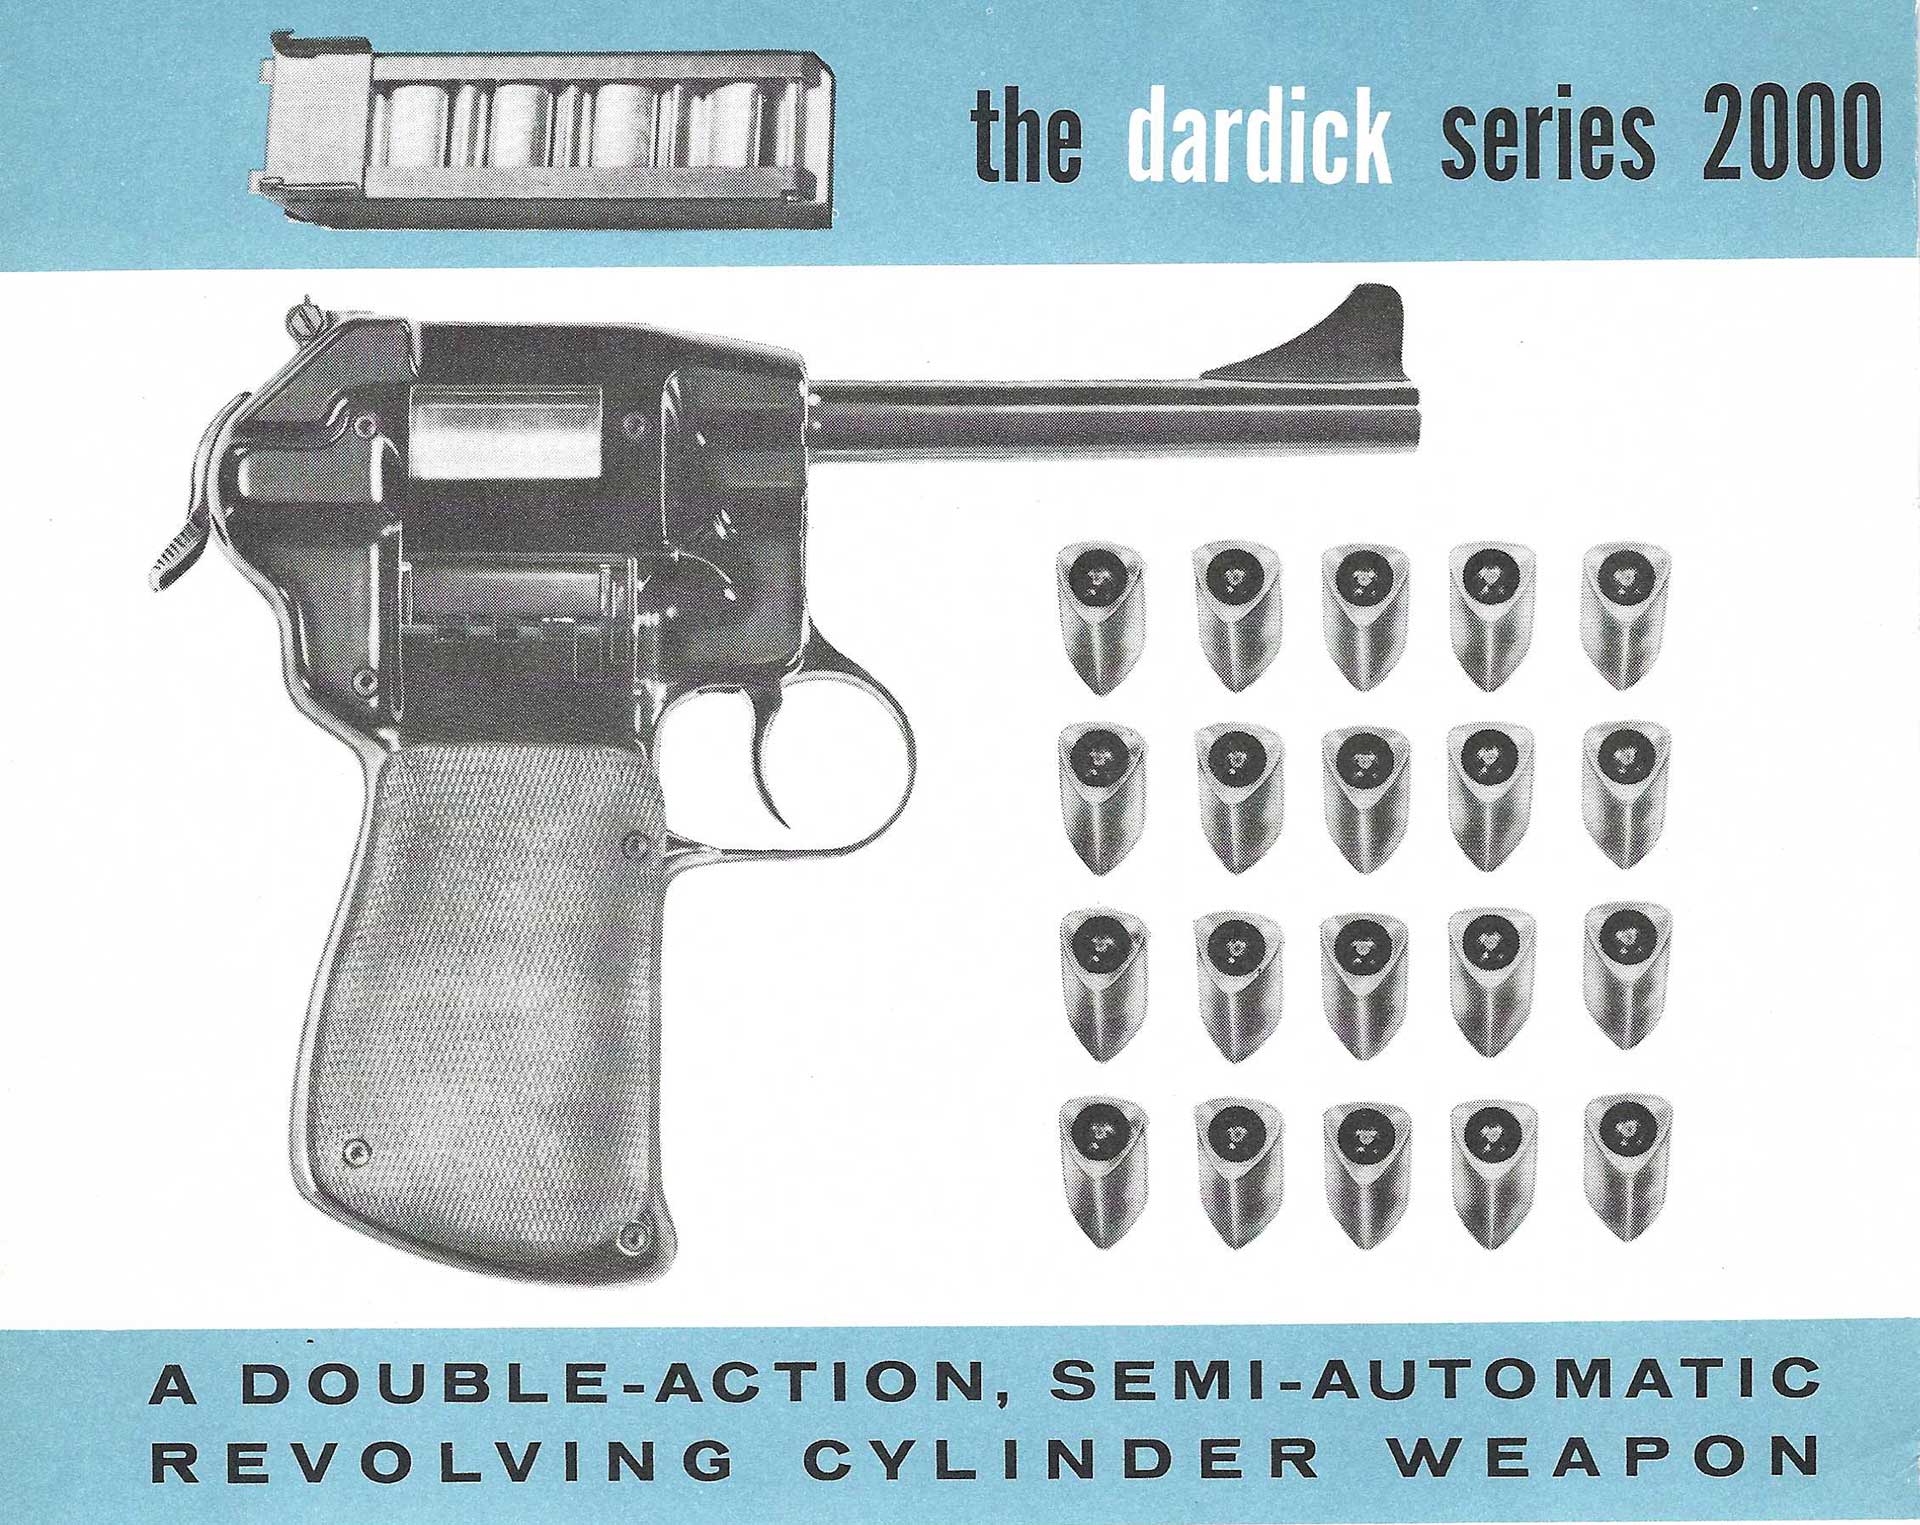 Dardick Series 2000 handgun with trounds and magazine shown on company literature